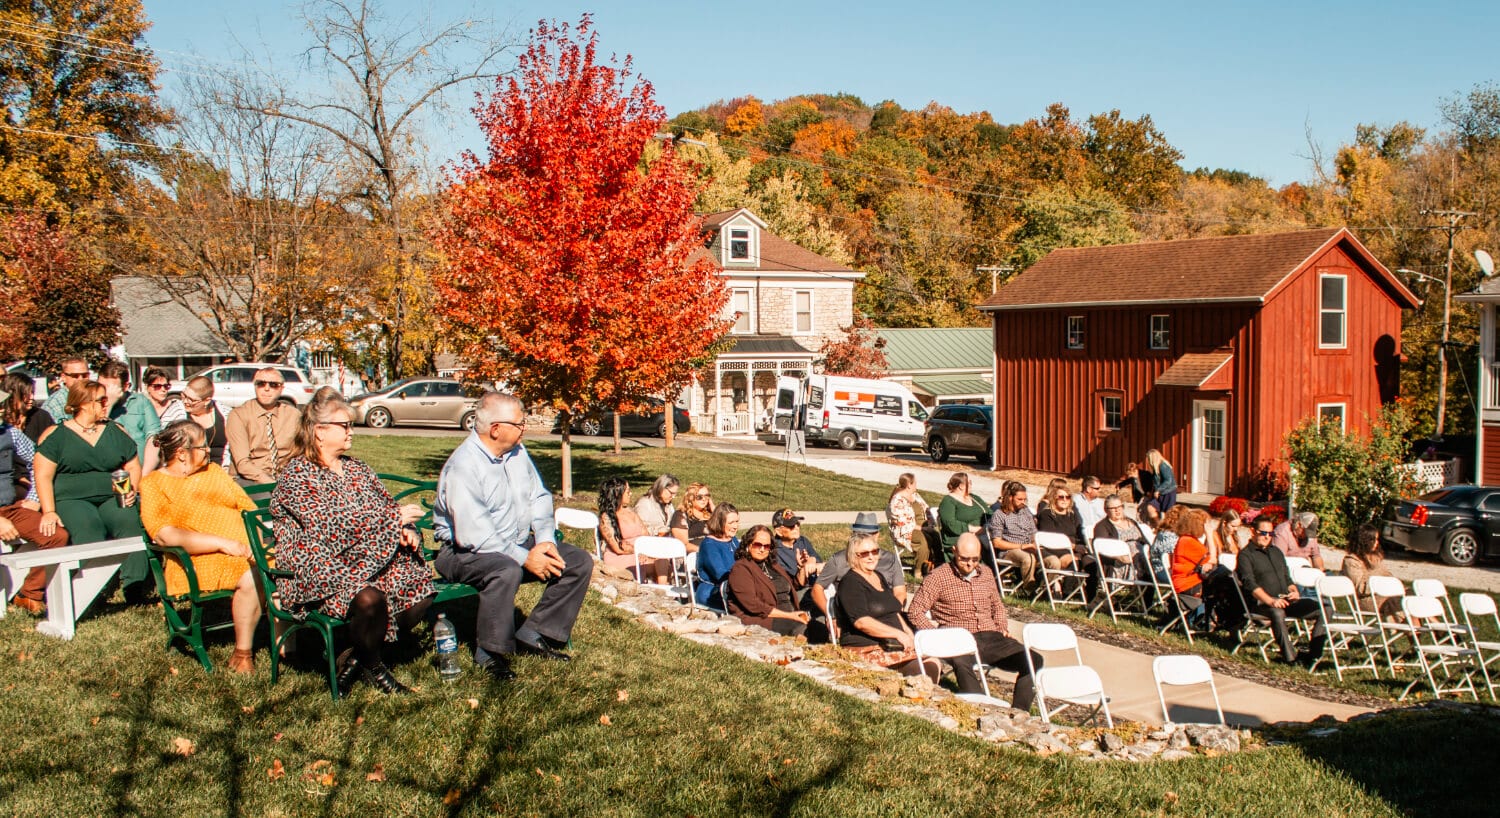 A group of people in chairs and outside preparing for a wedding, with trees with fall foliage of reds, oranges and browns and buildings around the grounds.